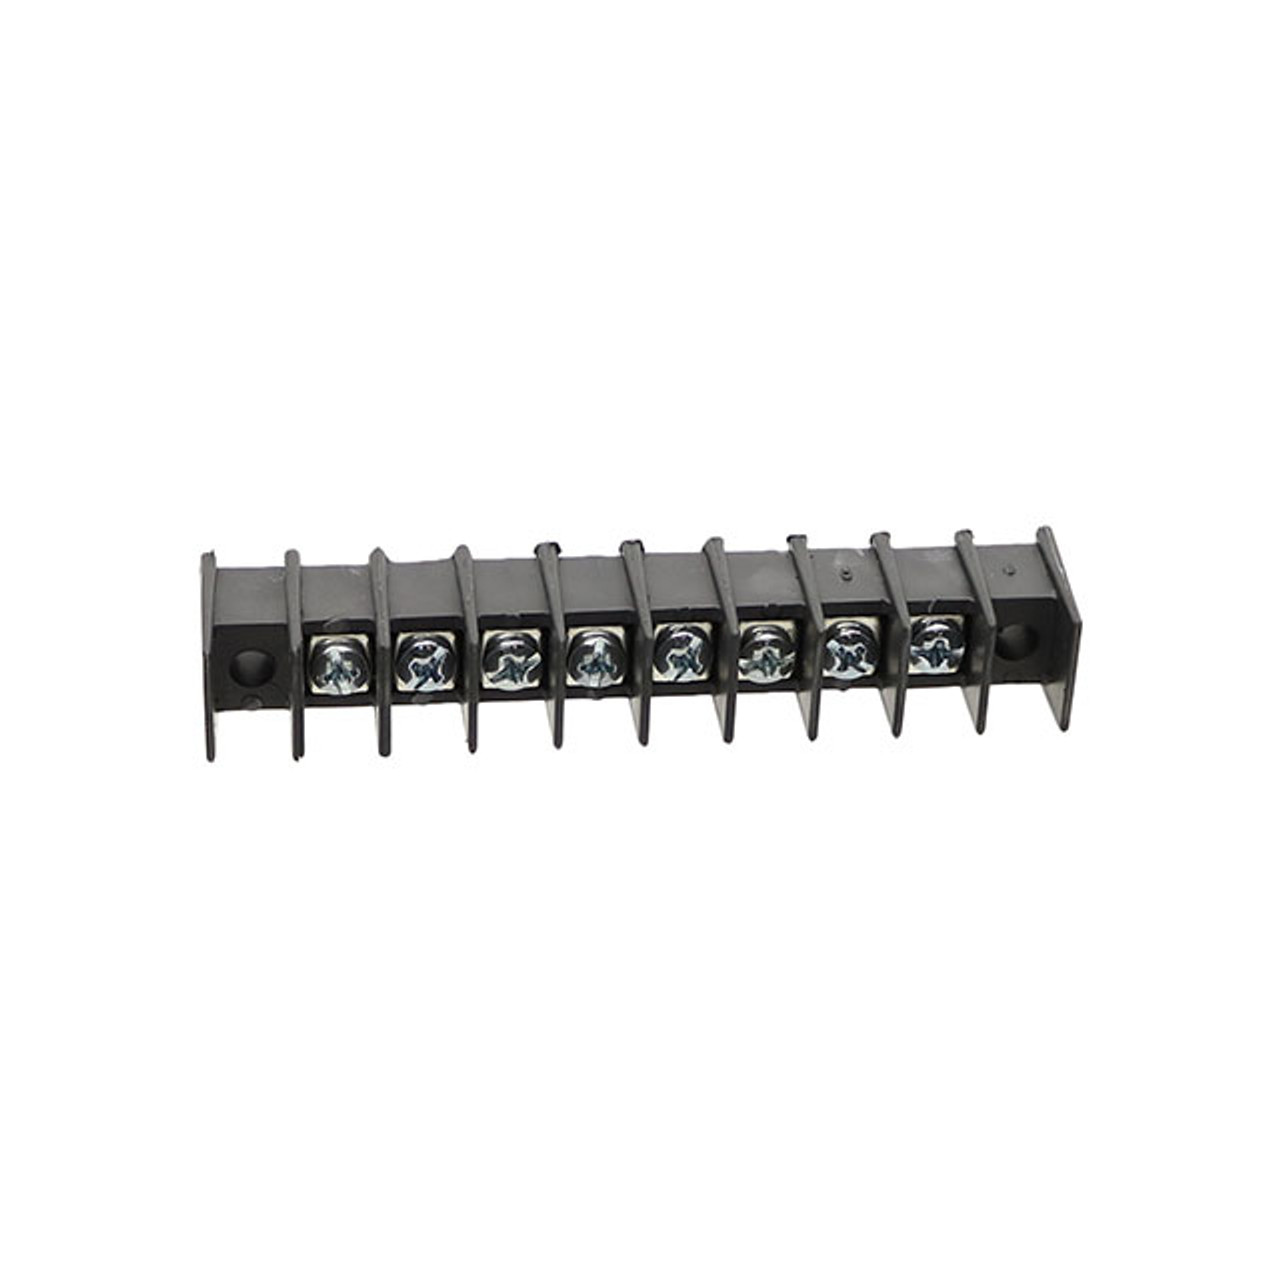 Curtis Industries T38000-08-0 Barrier Style Terminal Blocks